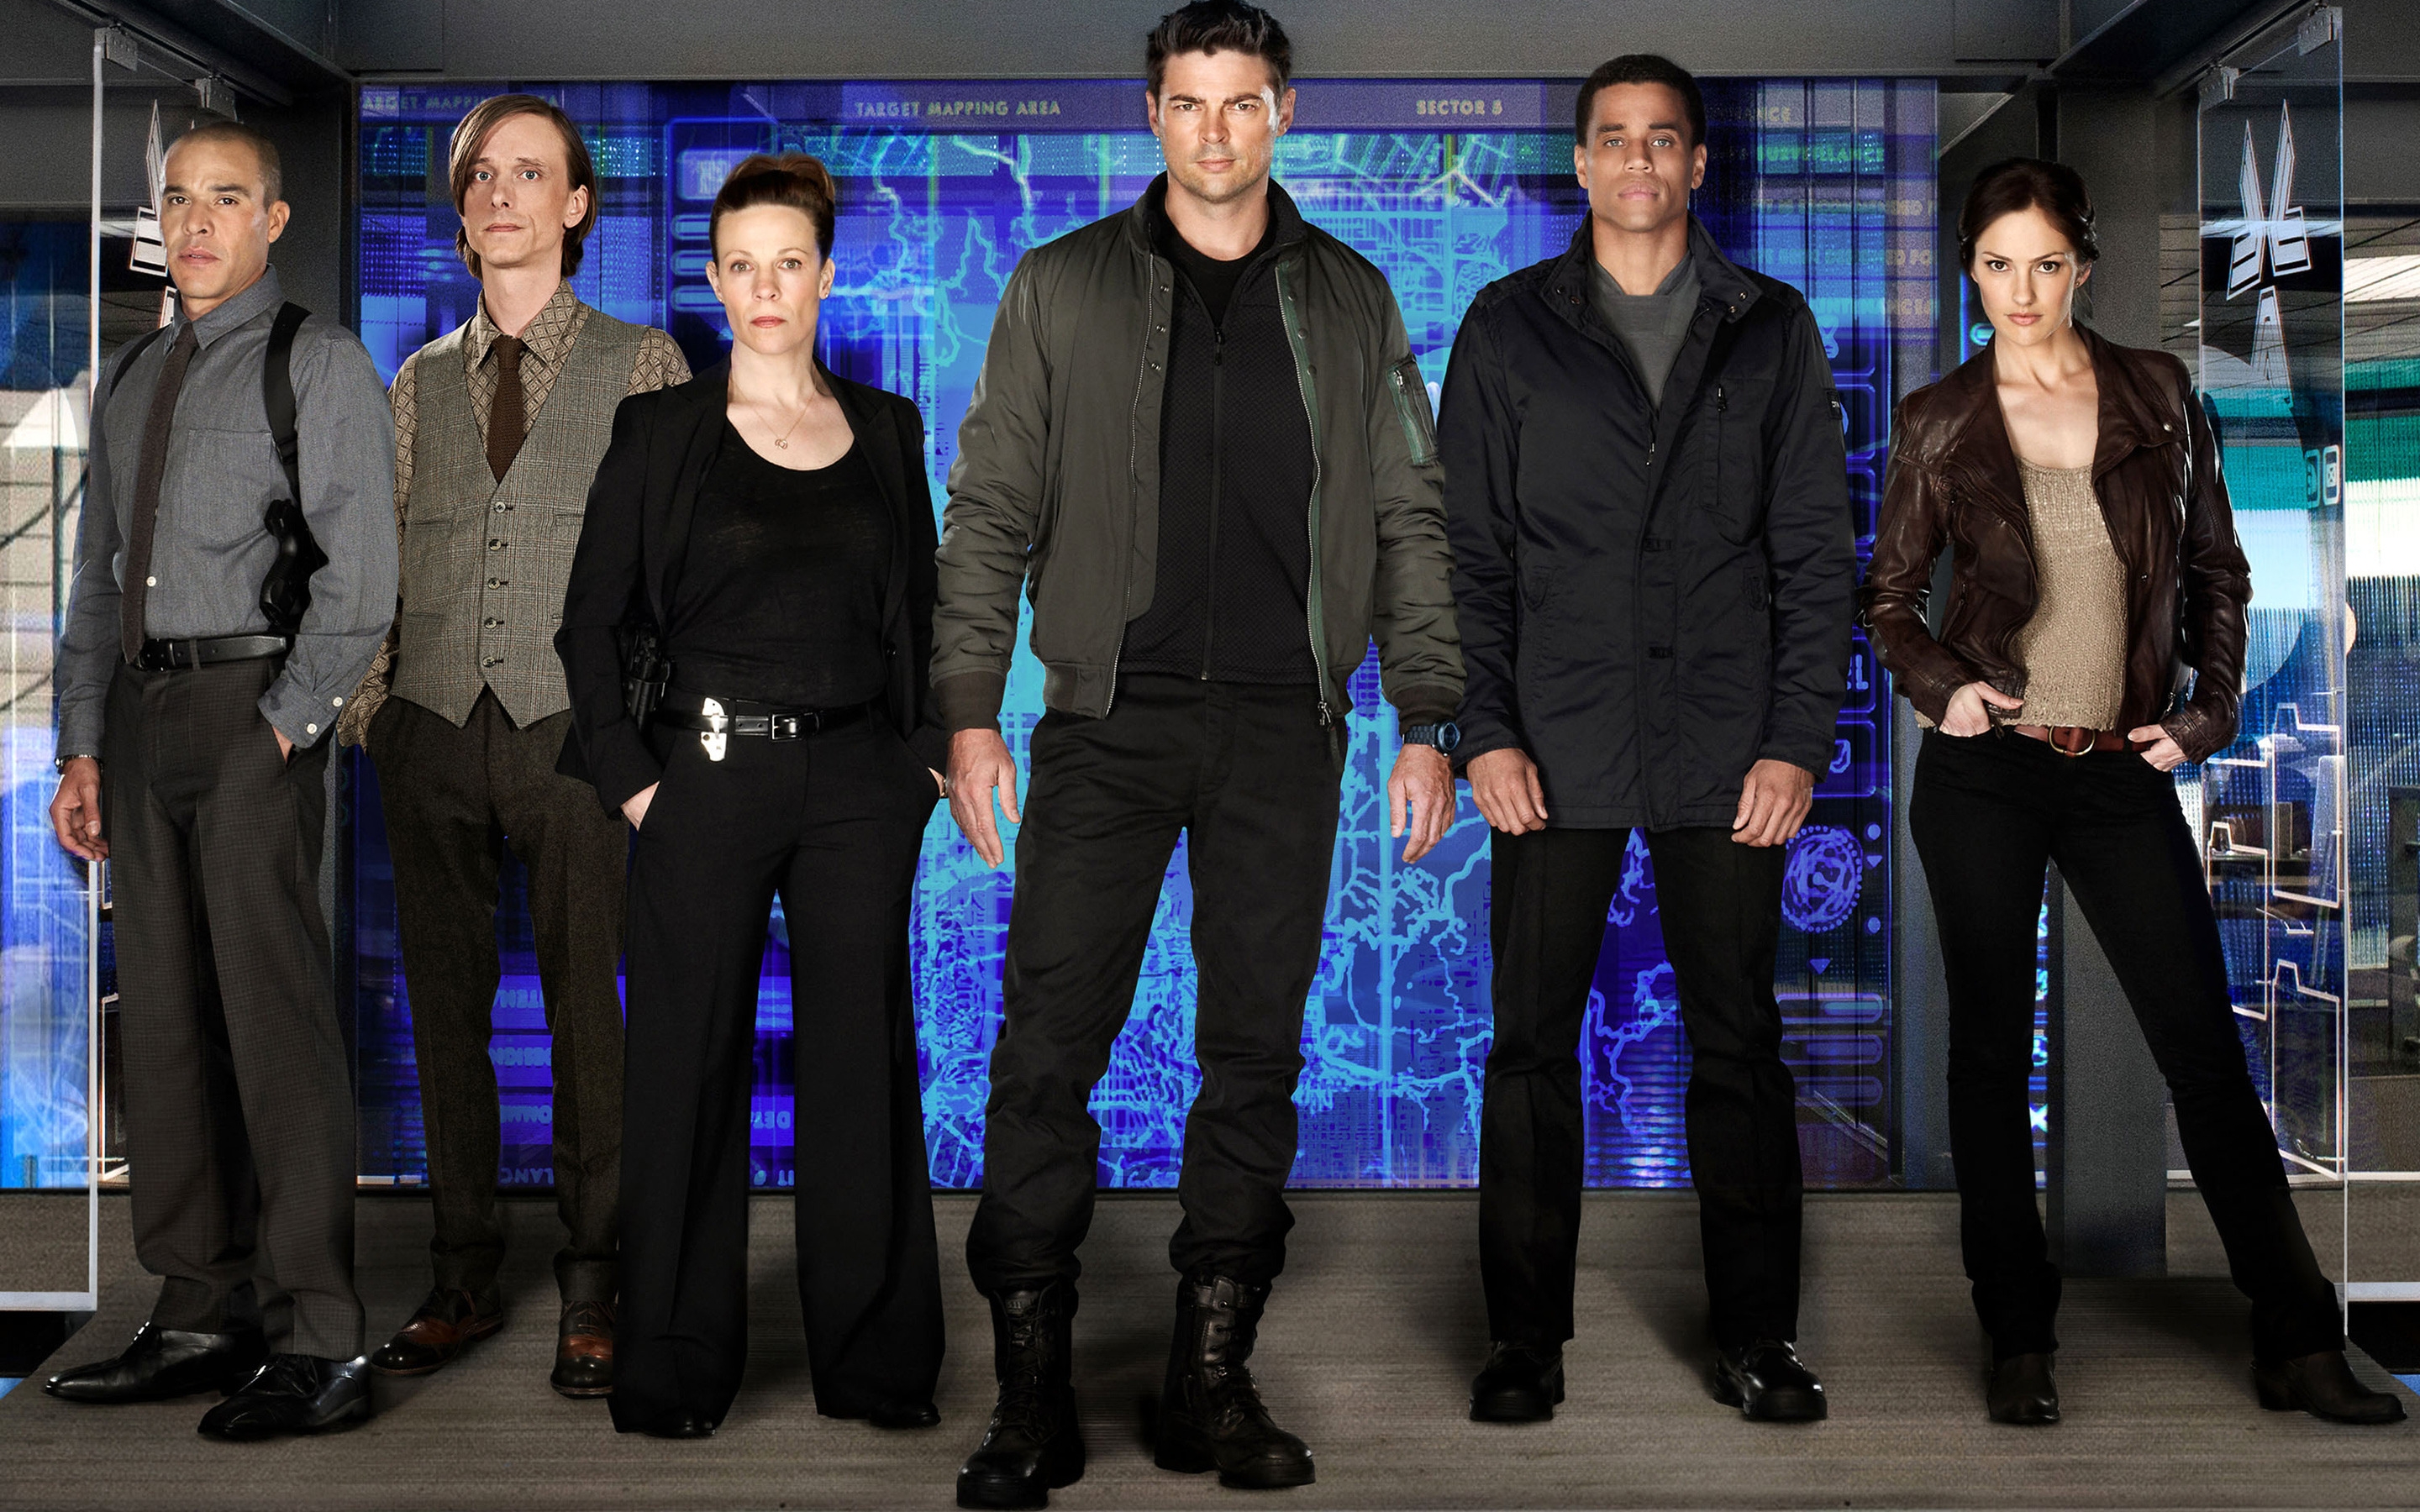 Almost Human Cast for 2880 x 1800 Retina Display resolution